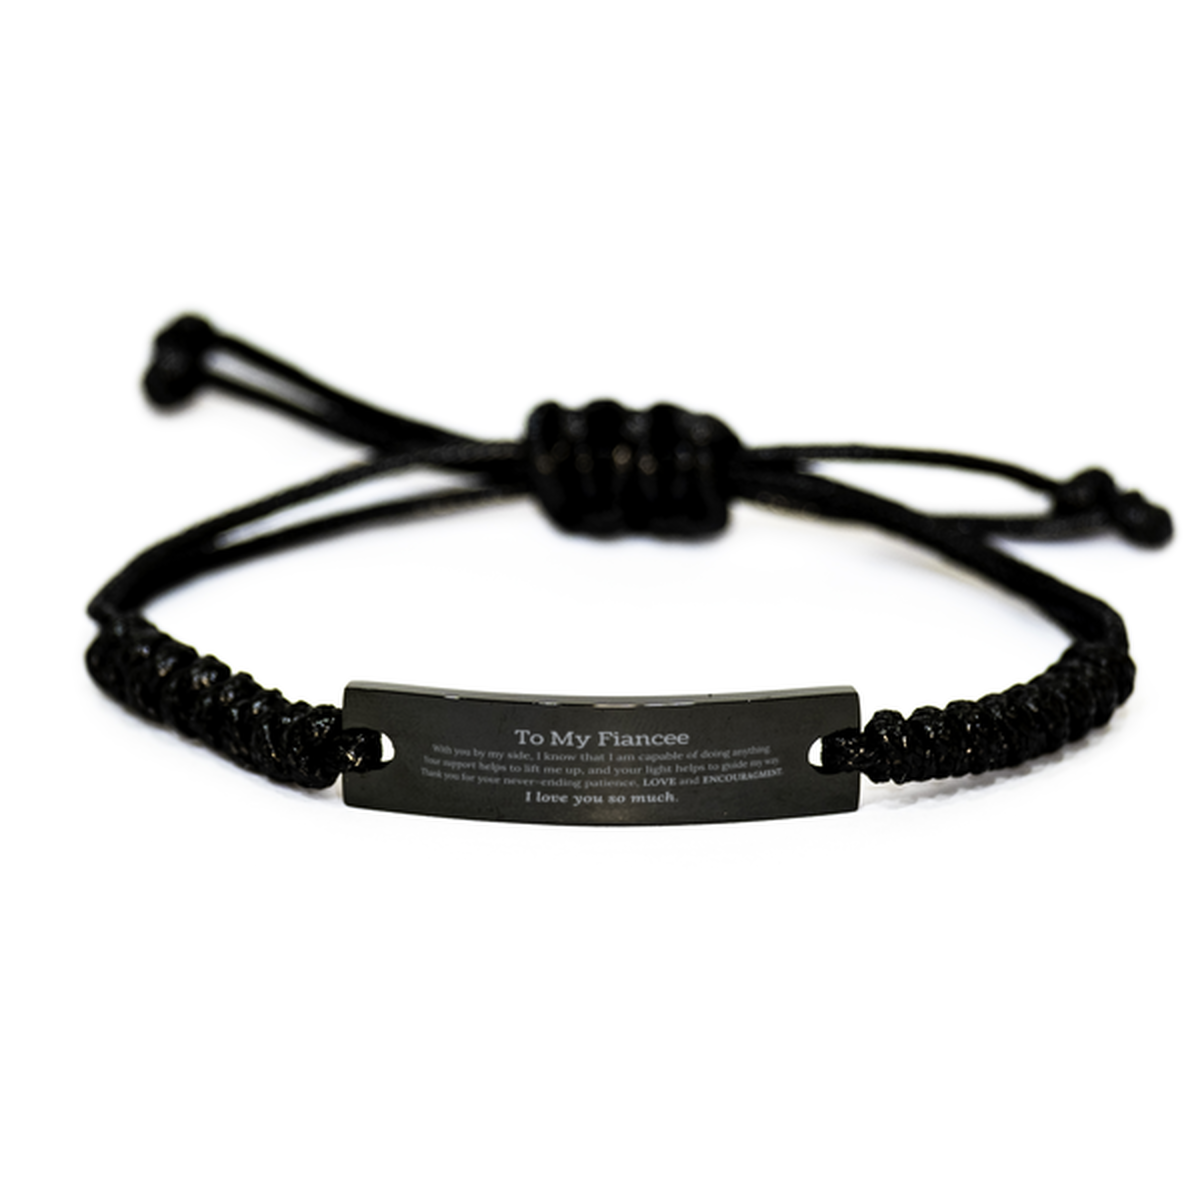 Appreciation Fiancee Black Rope Bracelet Gifts, To My Fiancee Birthday Christmas Wedding Keepsake Gifts for Fiancee With you by my side, I know that I am capable of doing anything. I love you so much